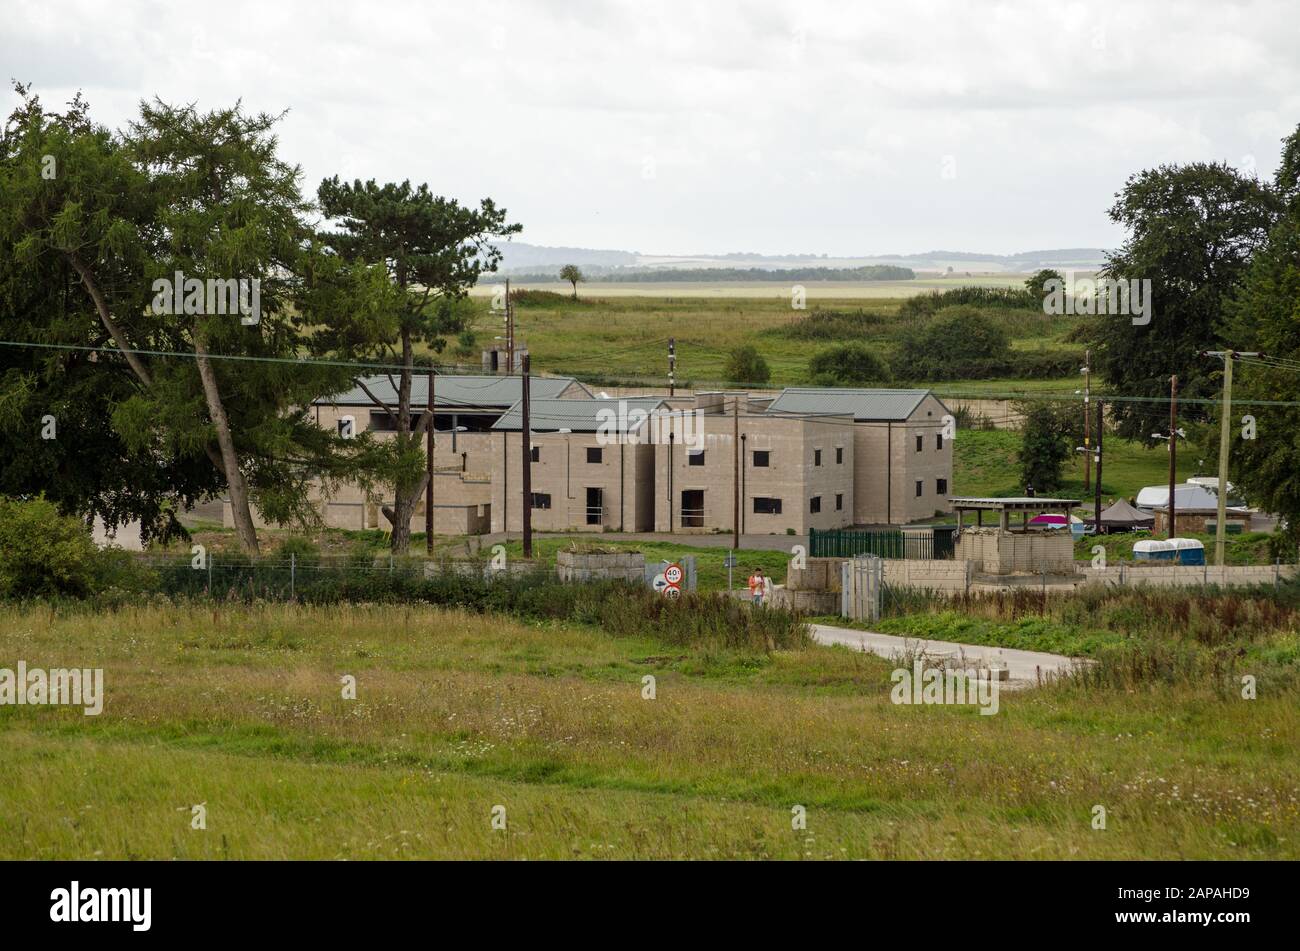 Wiltshire, UK - August 17, 2019: View of New Zealand Farm Camp used by the British Army for close combat training purpuses on the bleak Salisbury Plai Stock Photo